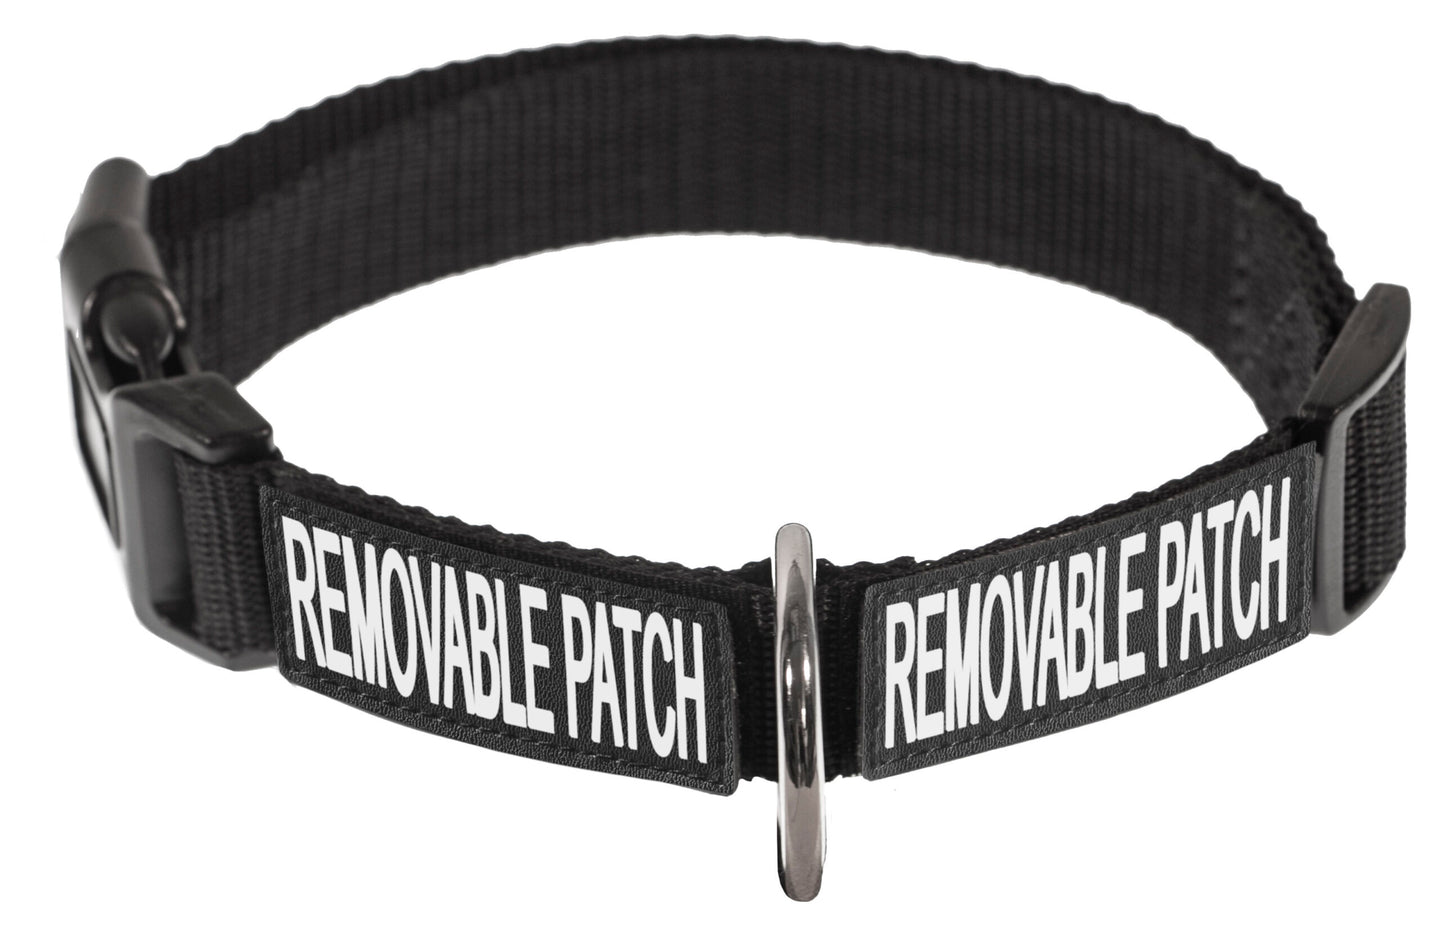 Omega Nylon Collar With Patch Hook